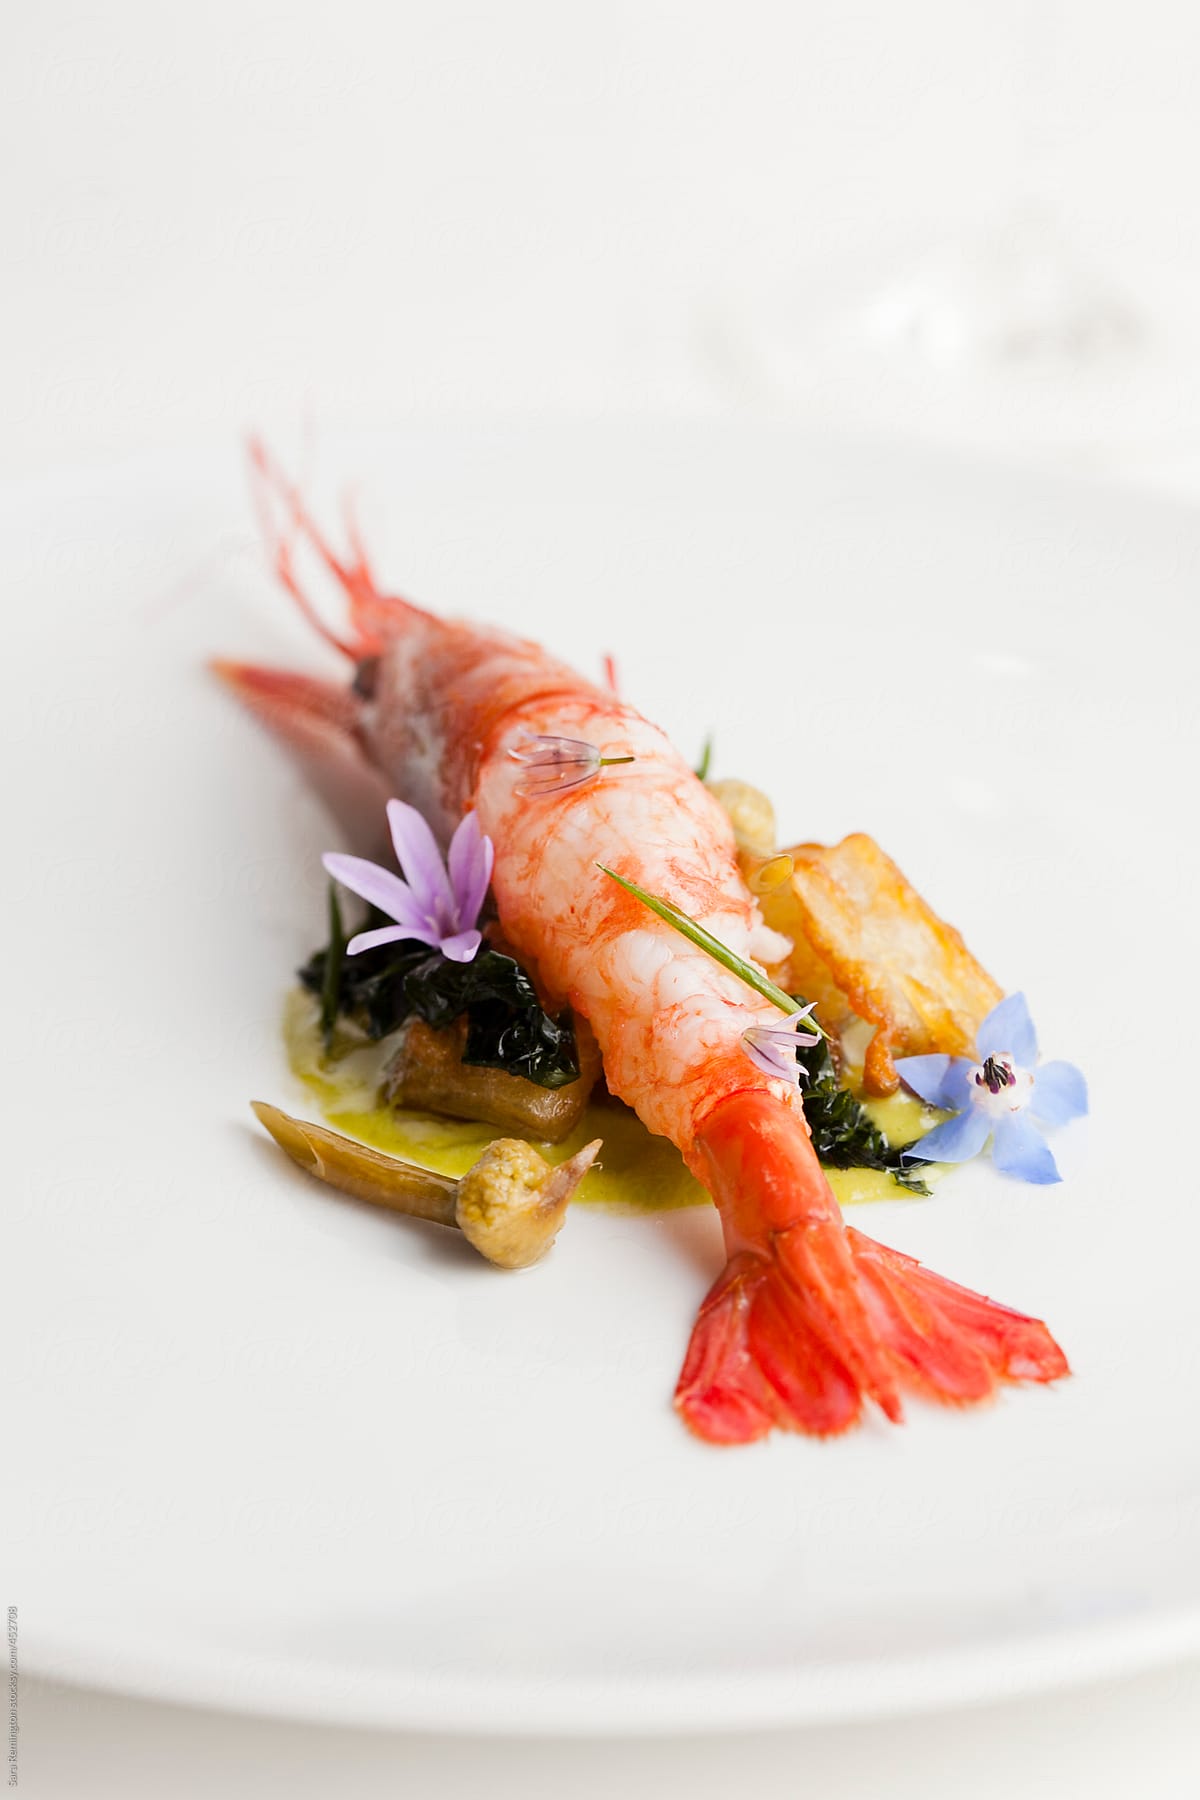 Plated Prawn With Edible Flowers